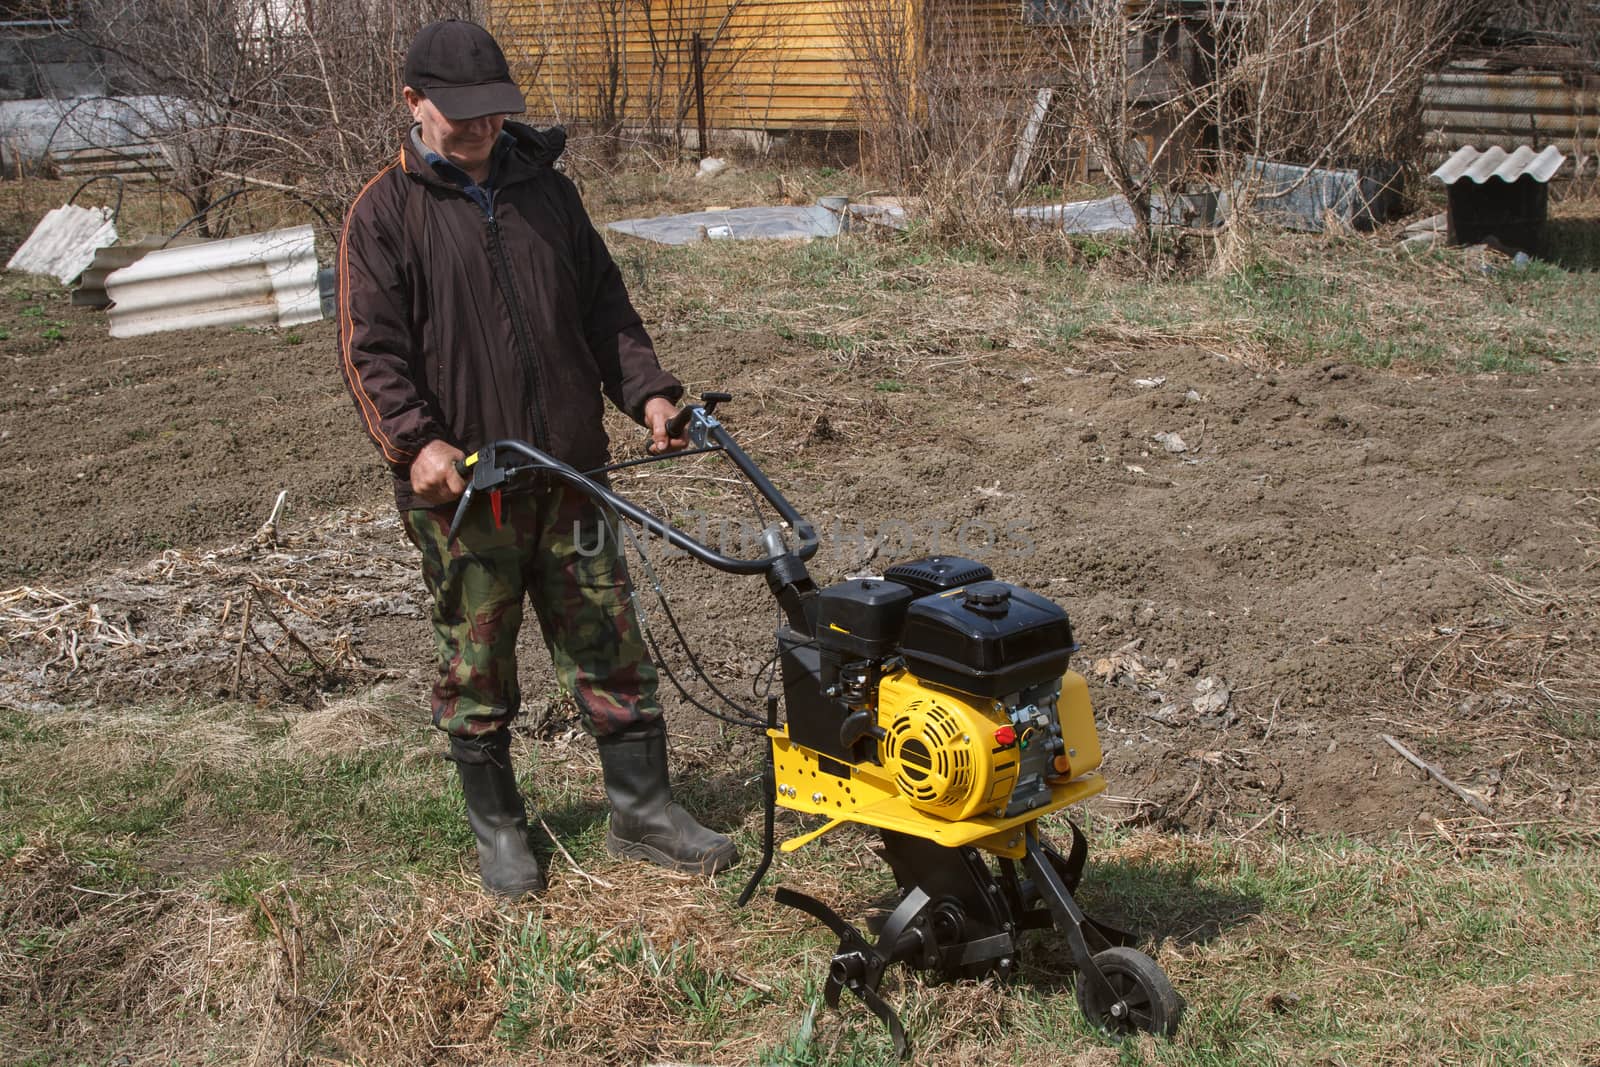 Man and new cultivator motor
